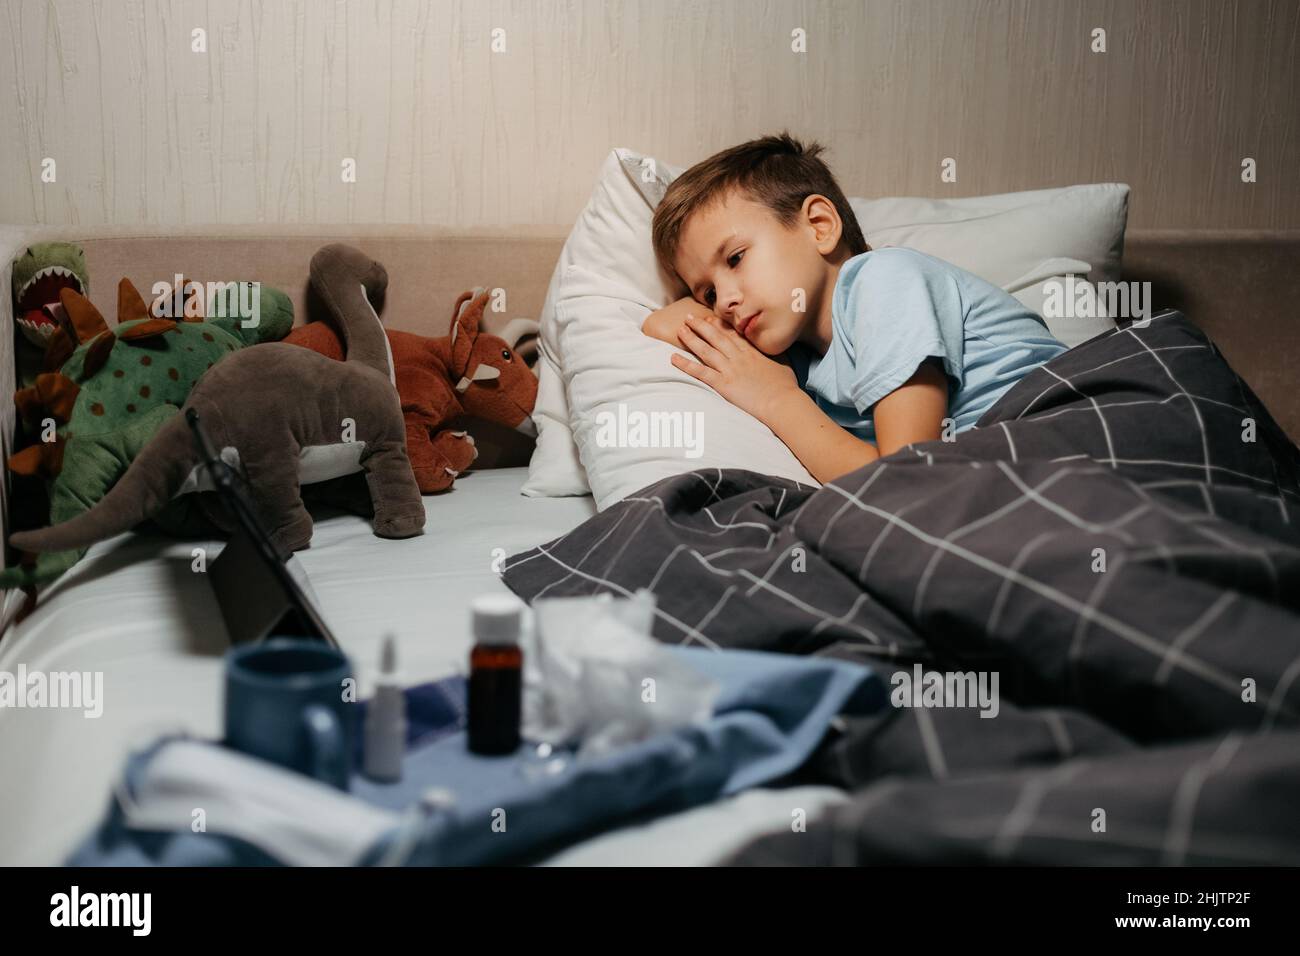 Very sad ill child laying in bed with toys and tablet Stock Photo